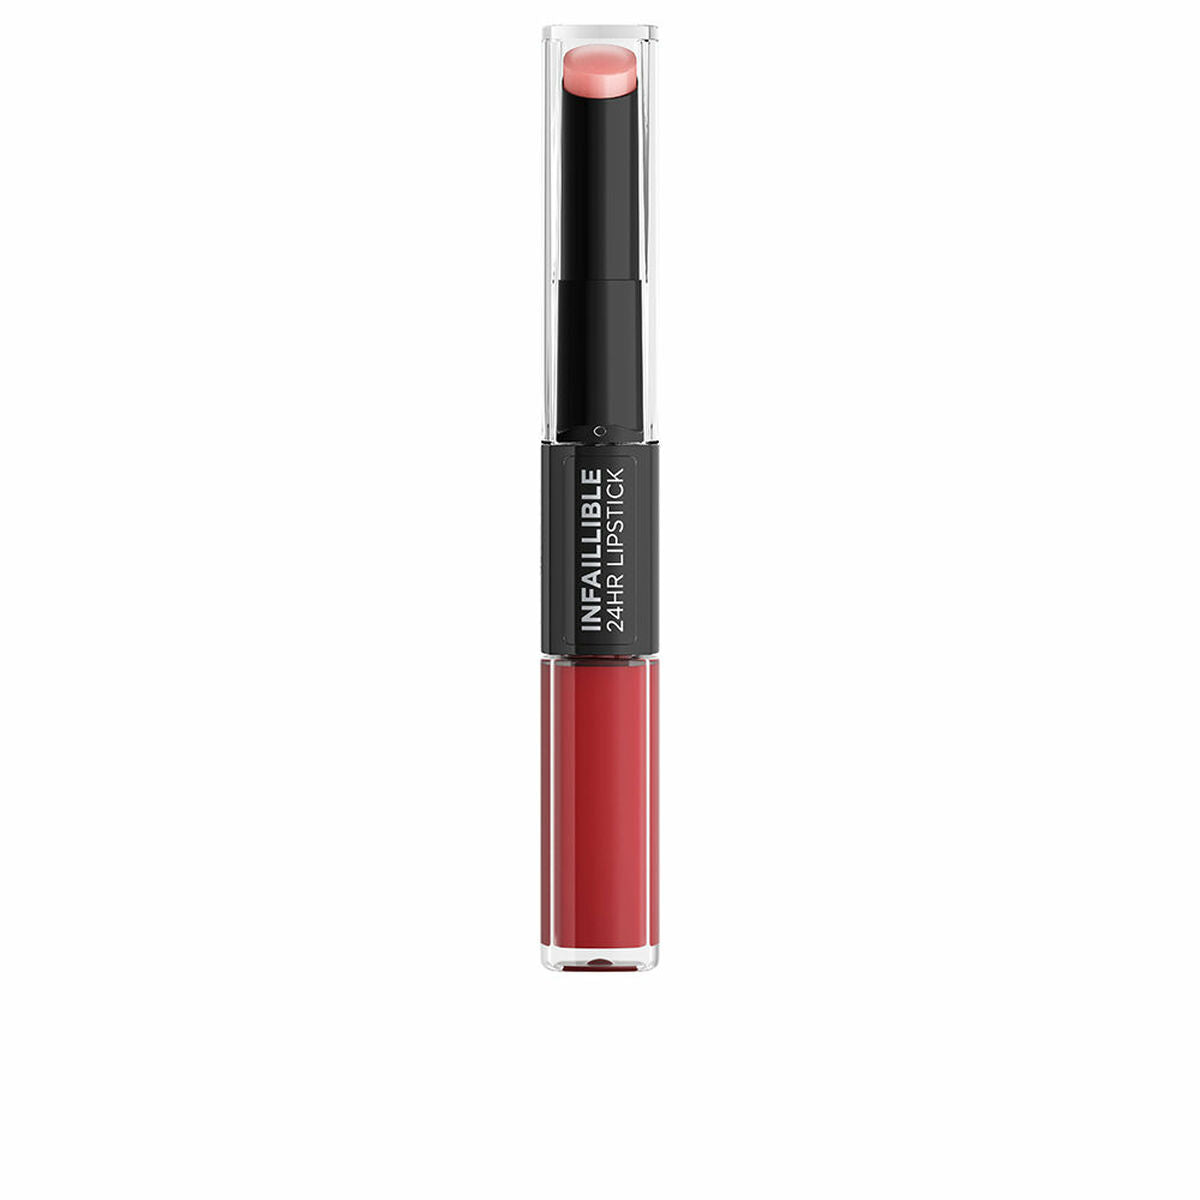 Lipgloss L'Oreal Make Up Infaillible  24 Stunden Nº 501 Timeless red 5,7 g - CA International 